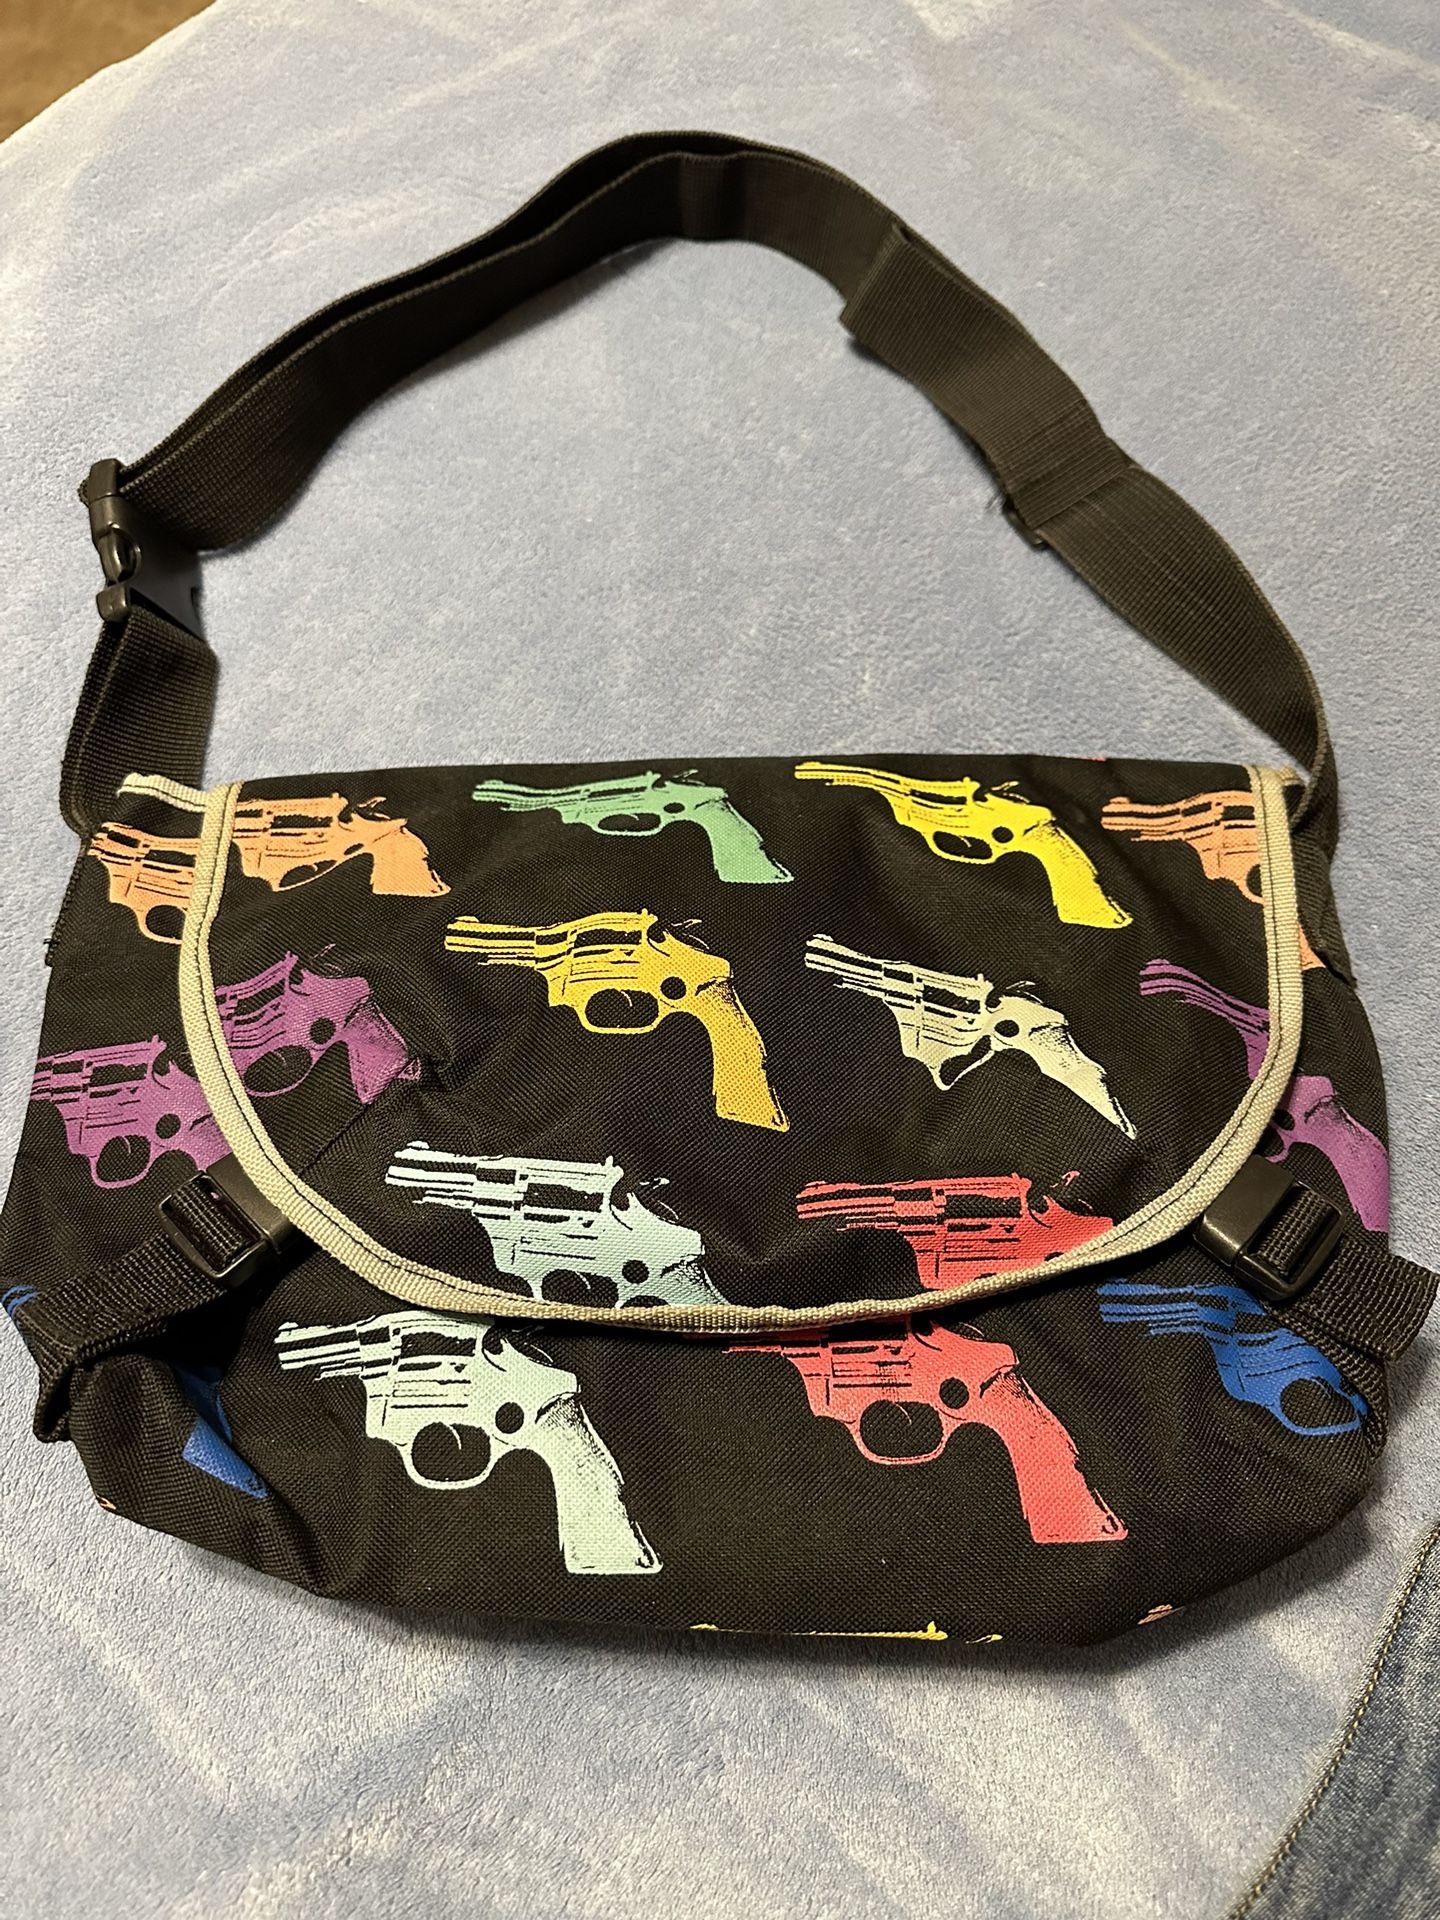 Messenger/crossbody ANDY Warhol Foundation For The Visual Arts